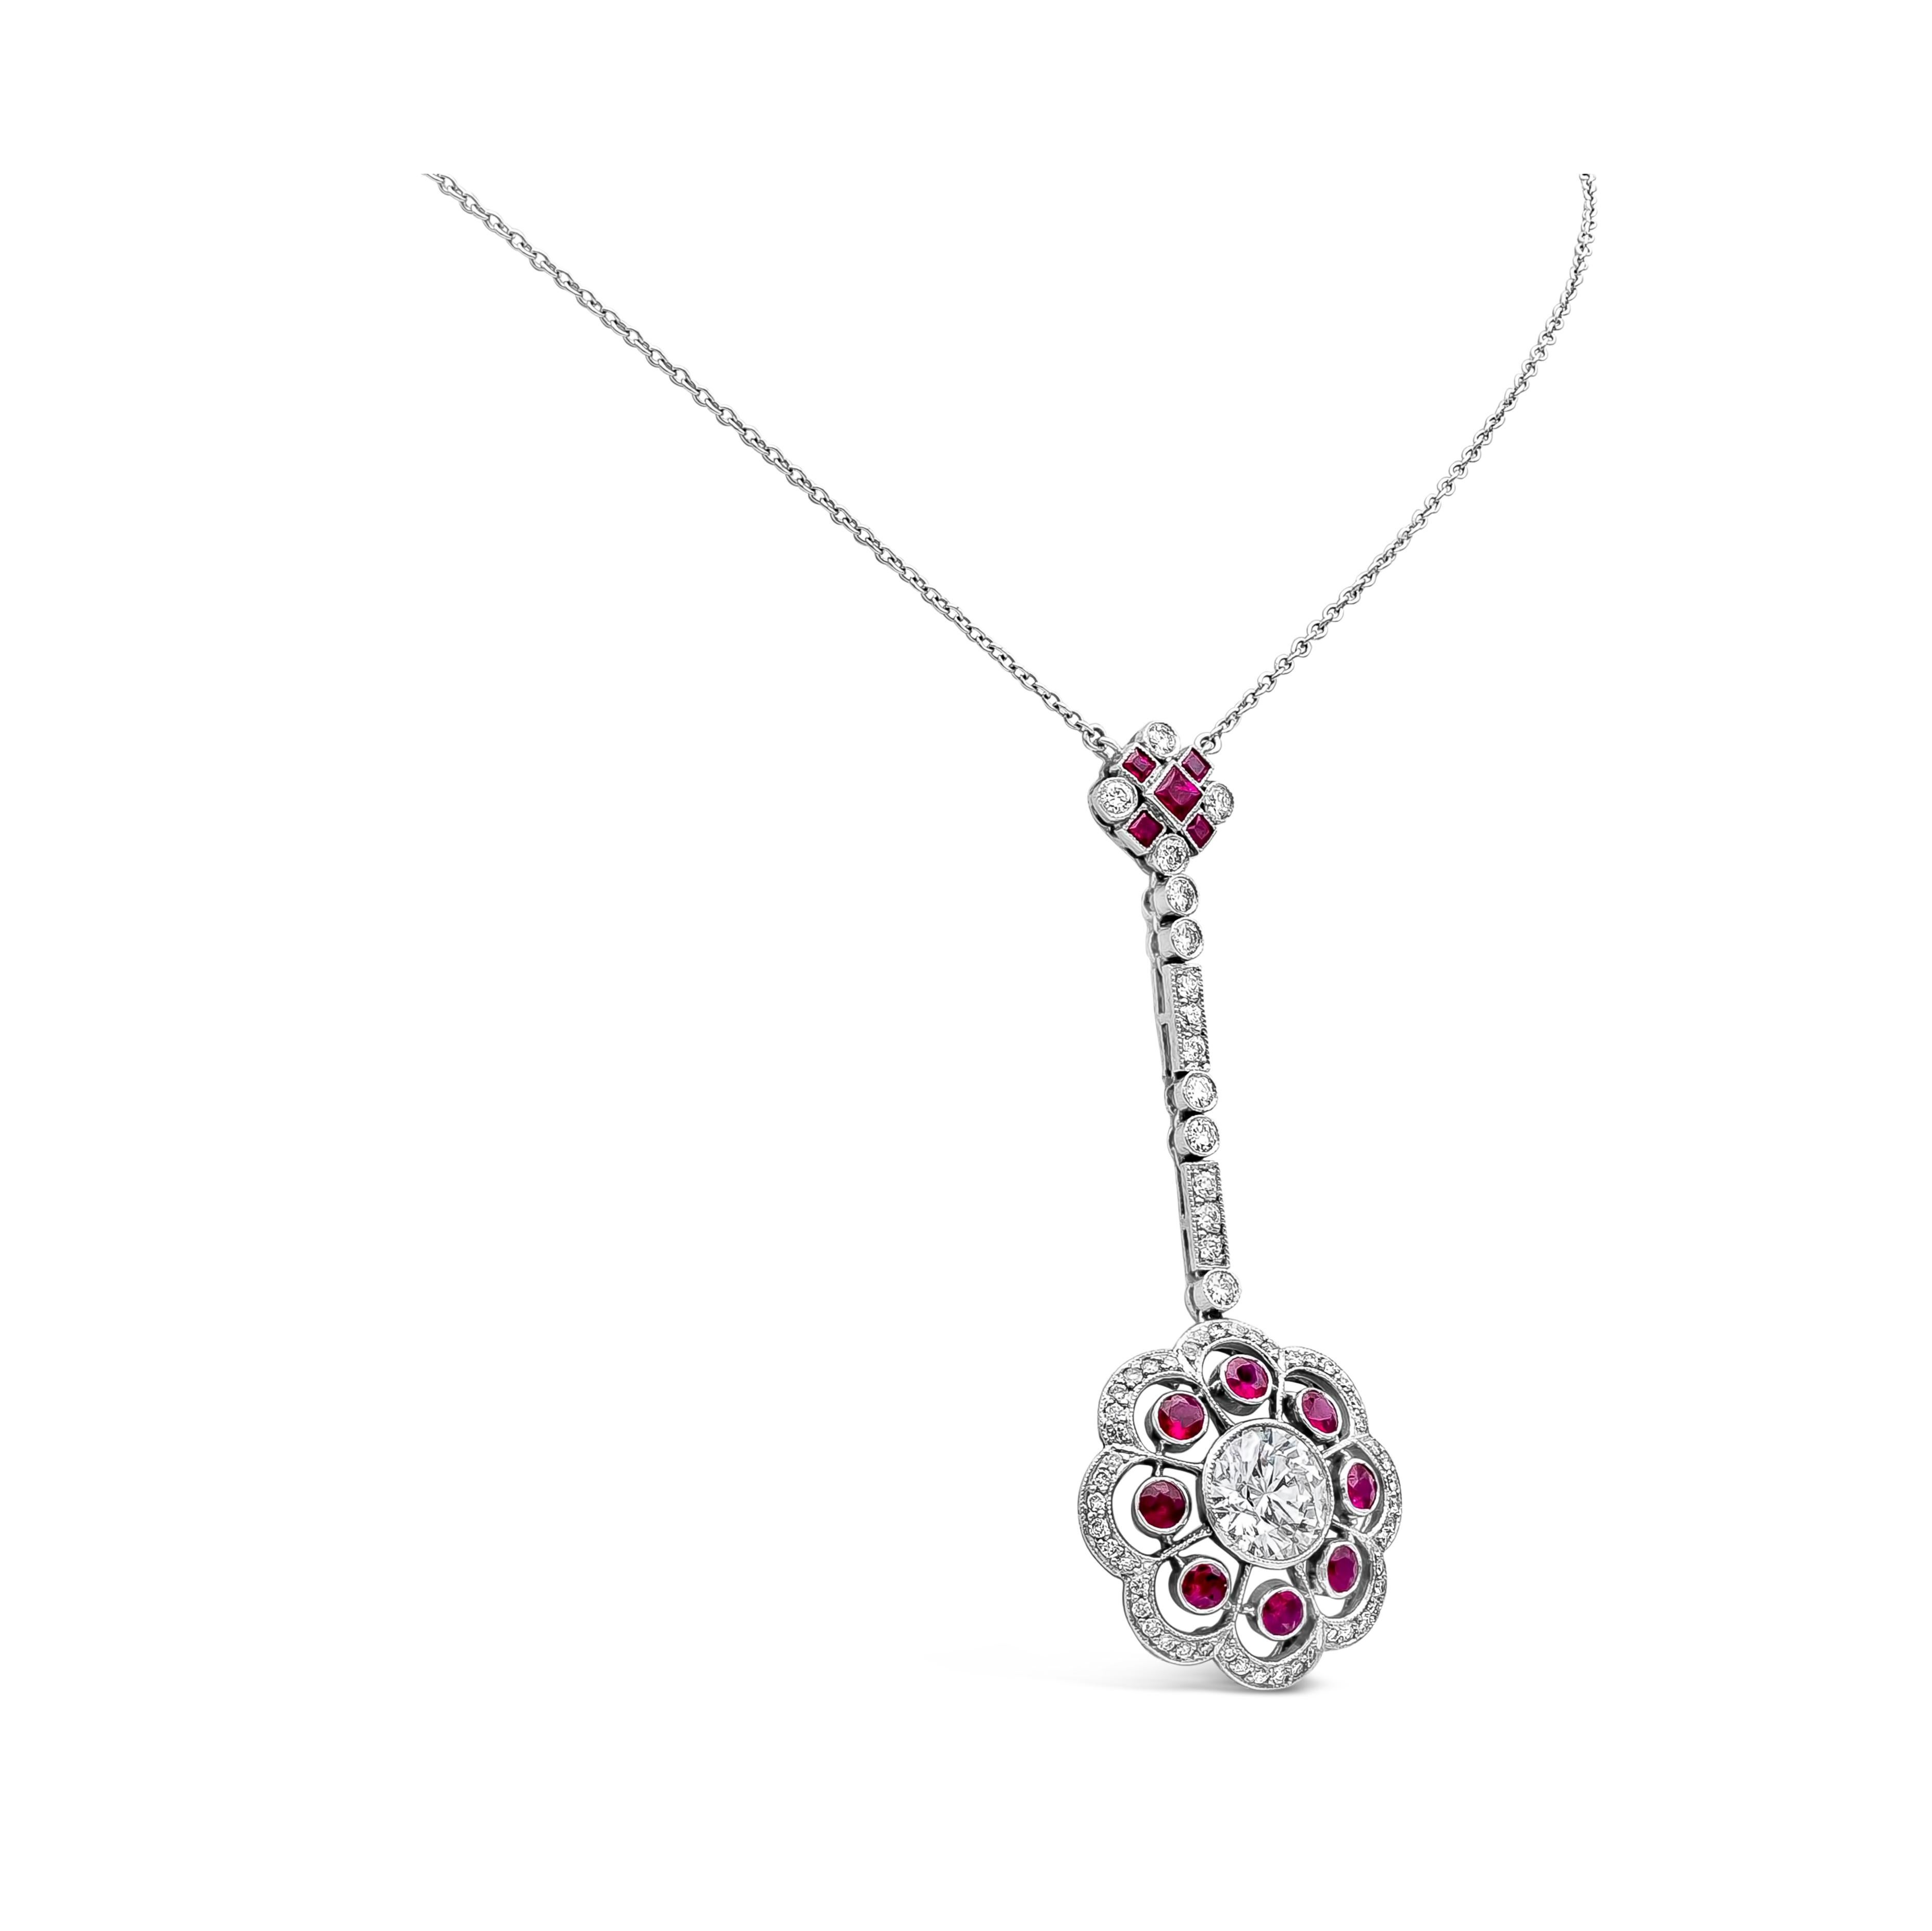 This beautiful pendant drop necklace showcasing a round brilliant diamond center stone embellished with eight full-cut red rubies spaced evenly all around. Finished the floral-motif design with a diamond set in the outer layer. Spaced by a single